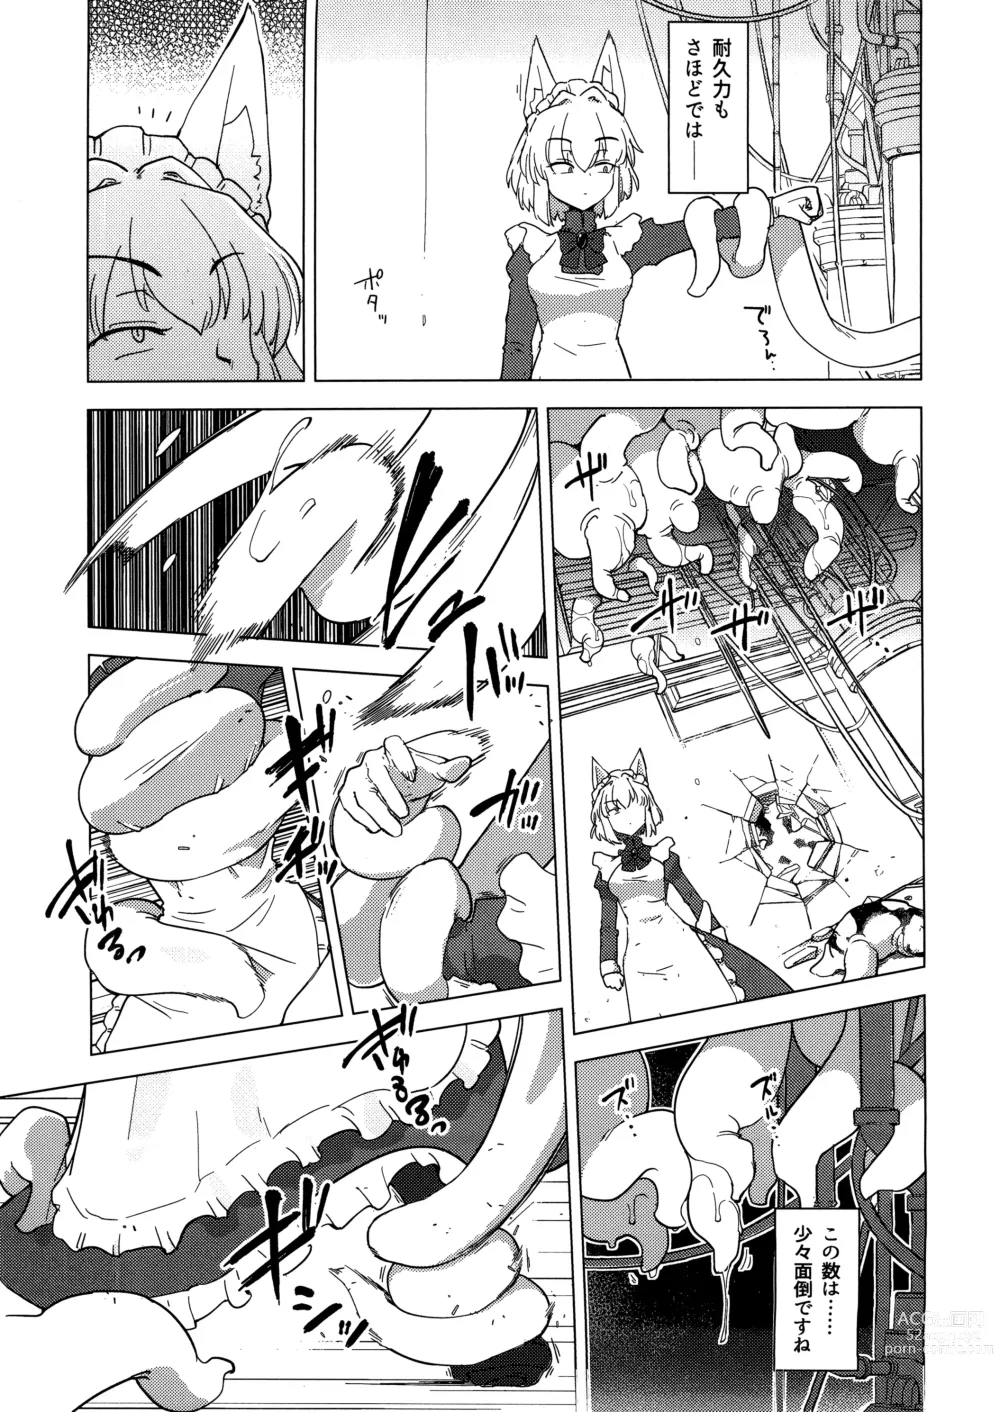 Page 10 of doujinshi Wolf in sheeps clothing in Tentacles